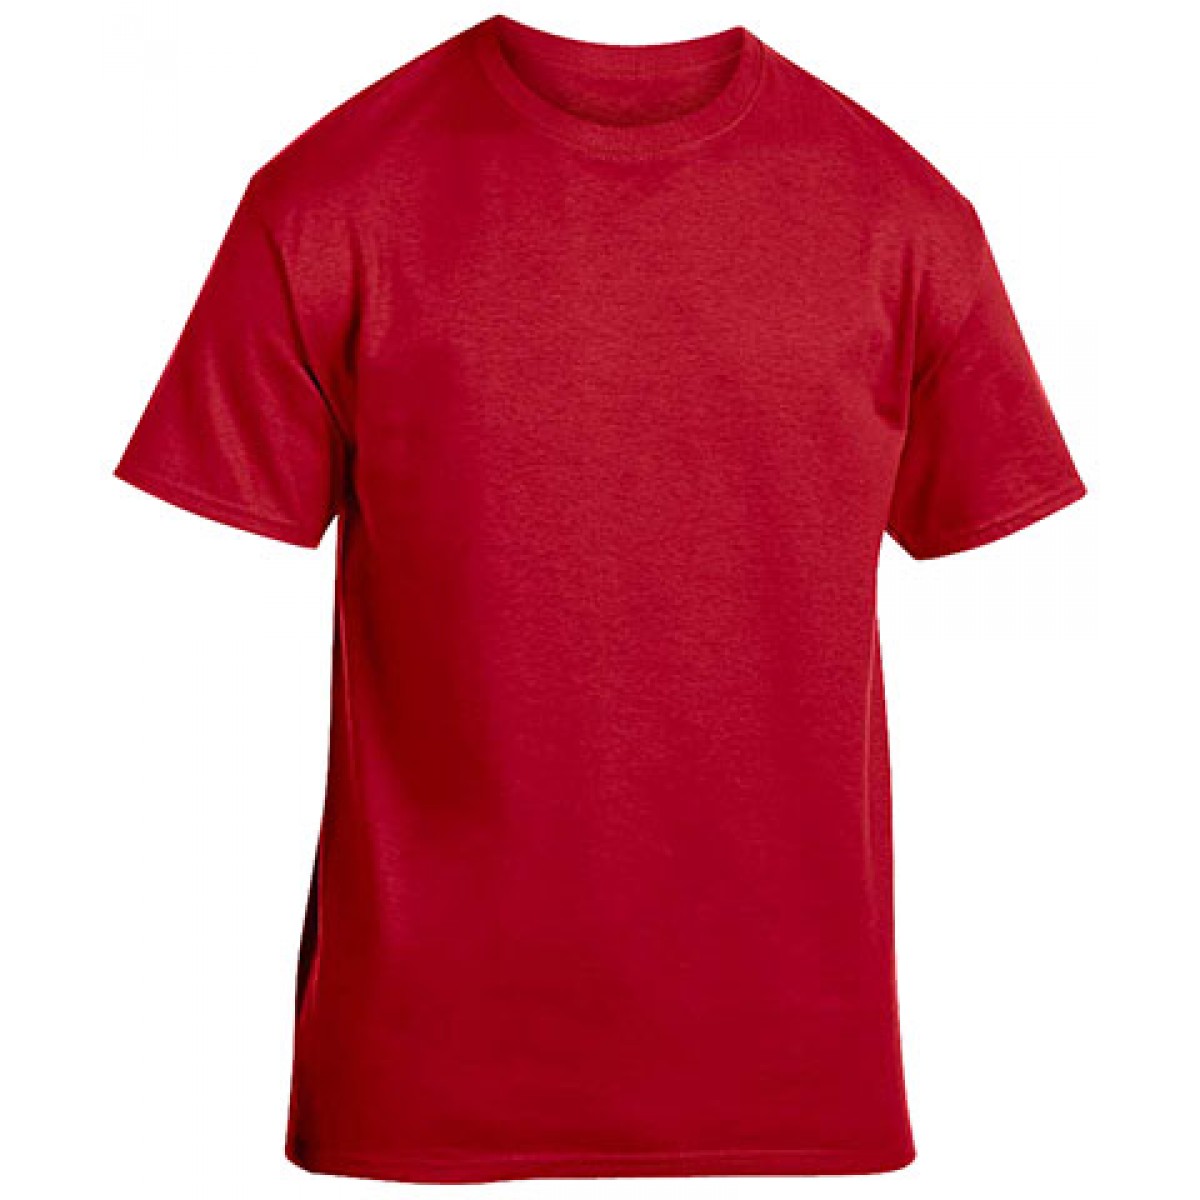 Heavy Cotton Activewear T-Shirt-Red-L